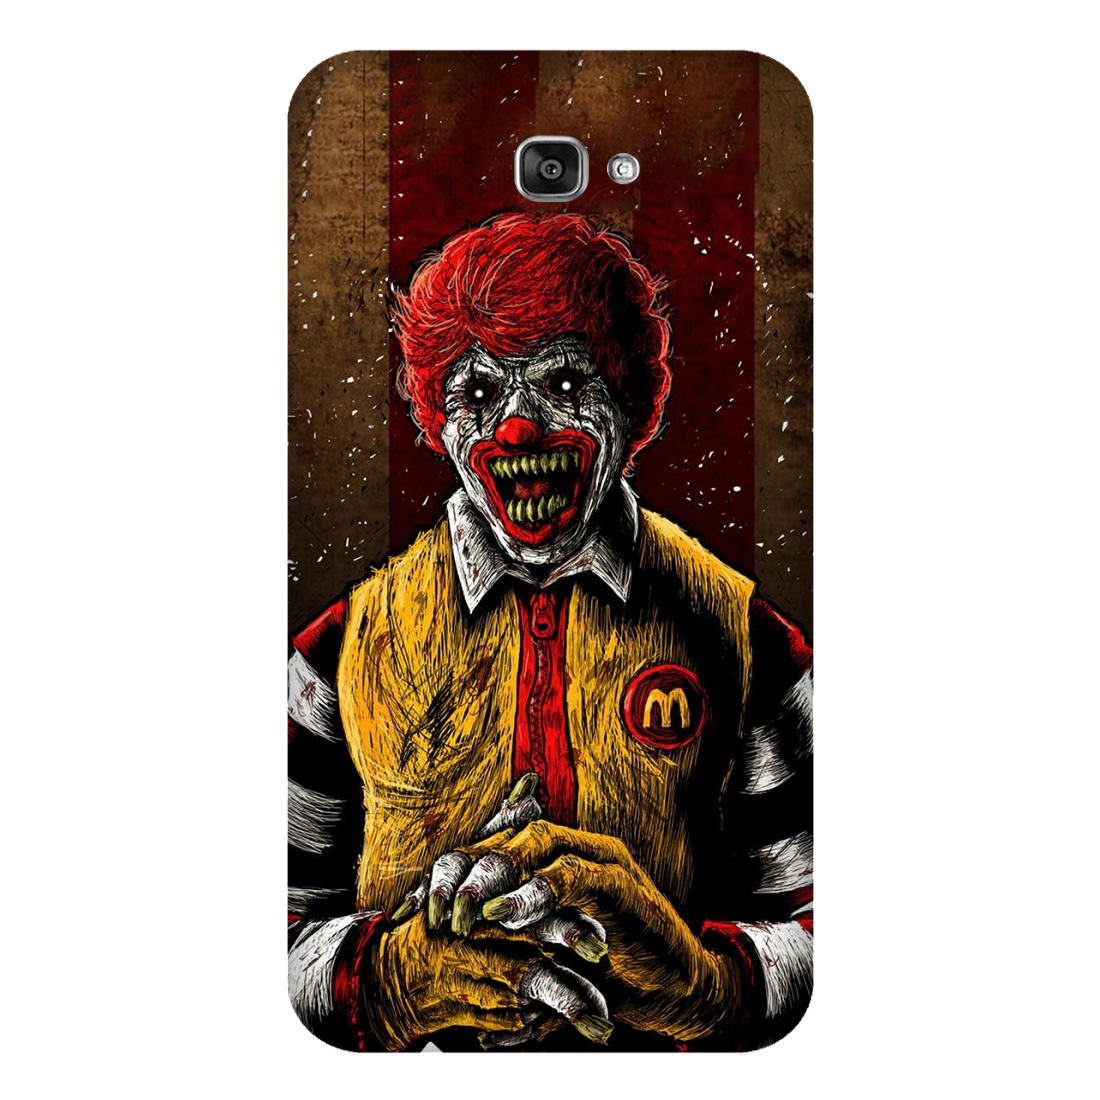 Sinister Shadows of Ronald Case Samsung Galaxy J7 Prime